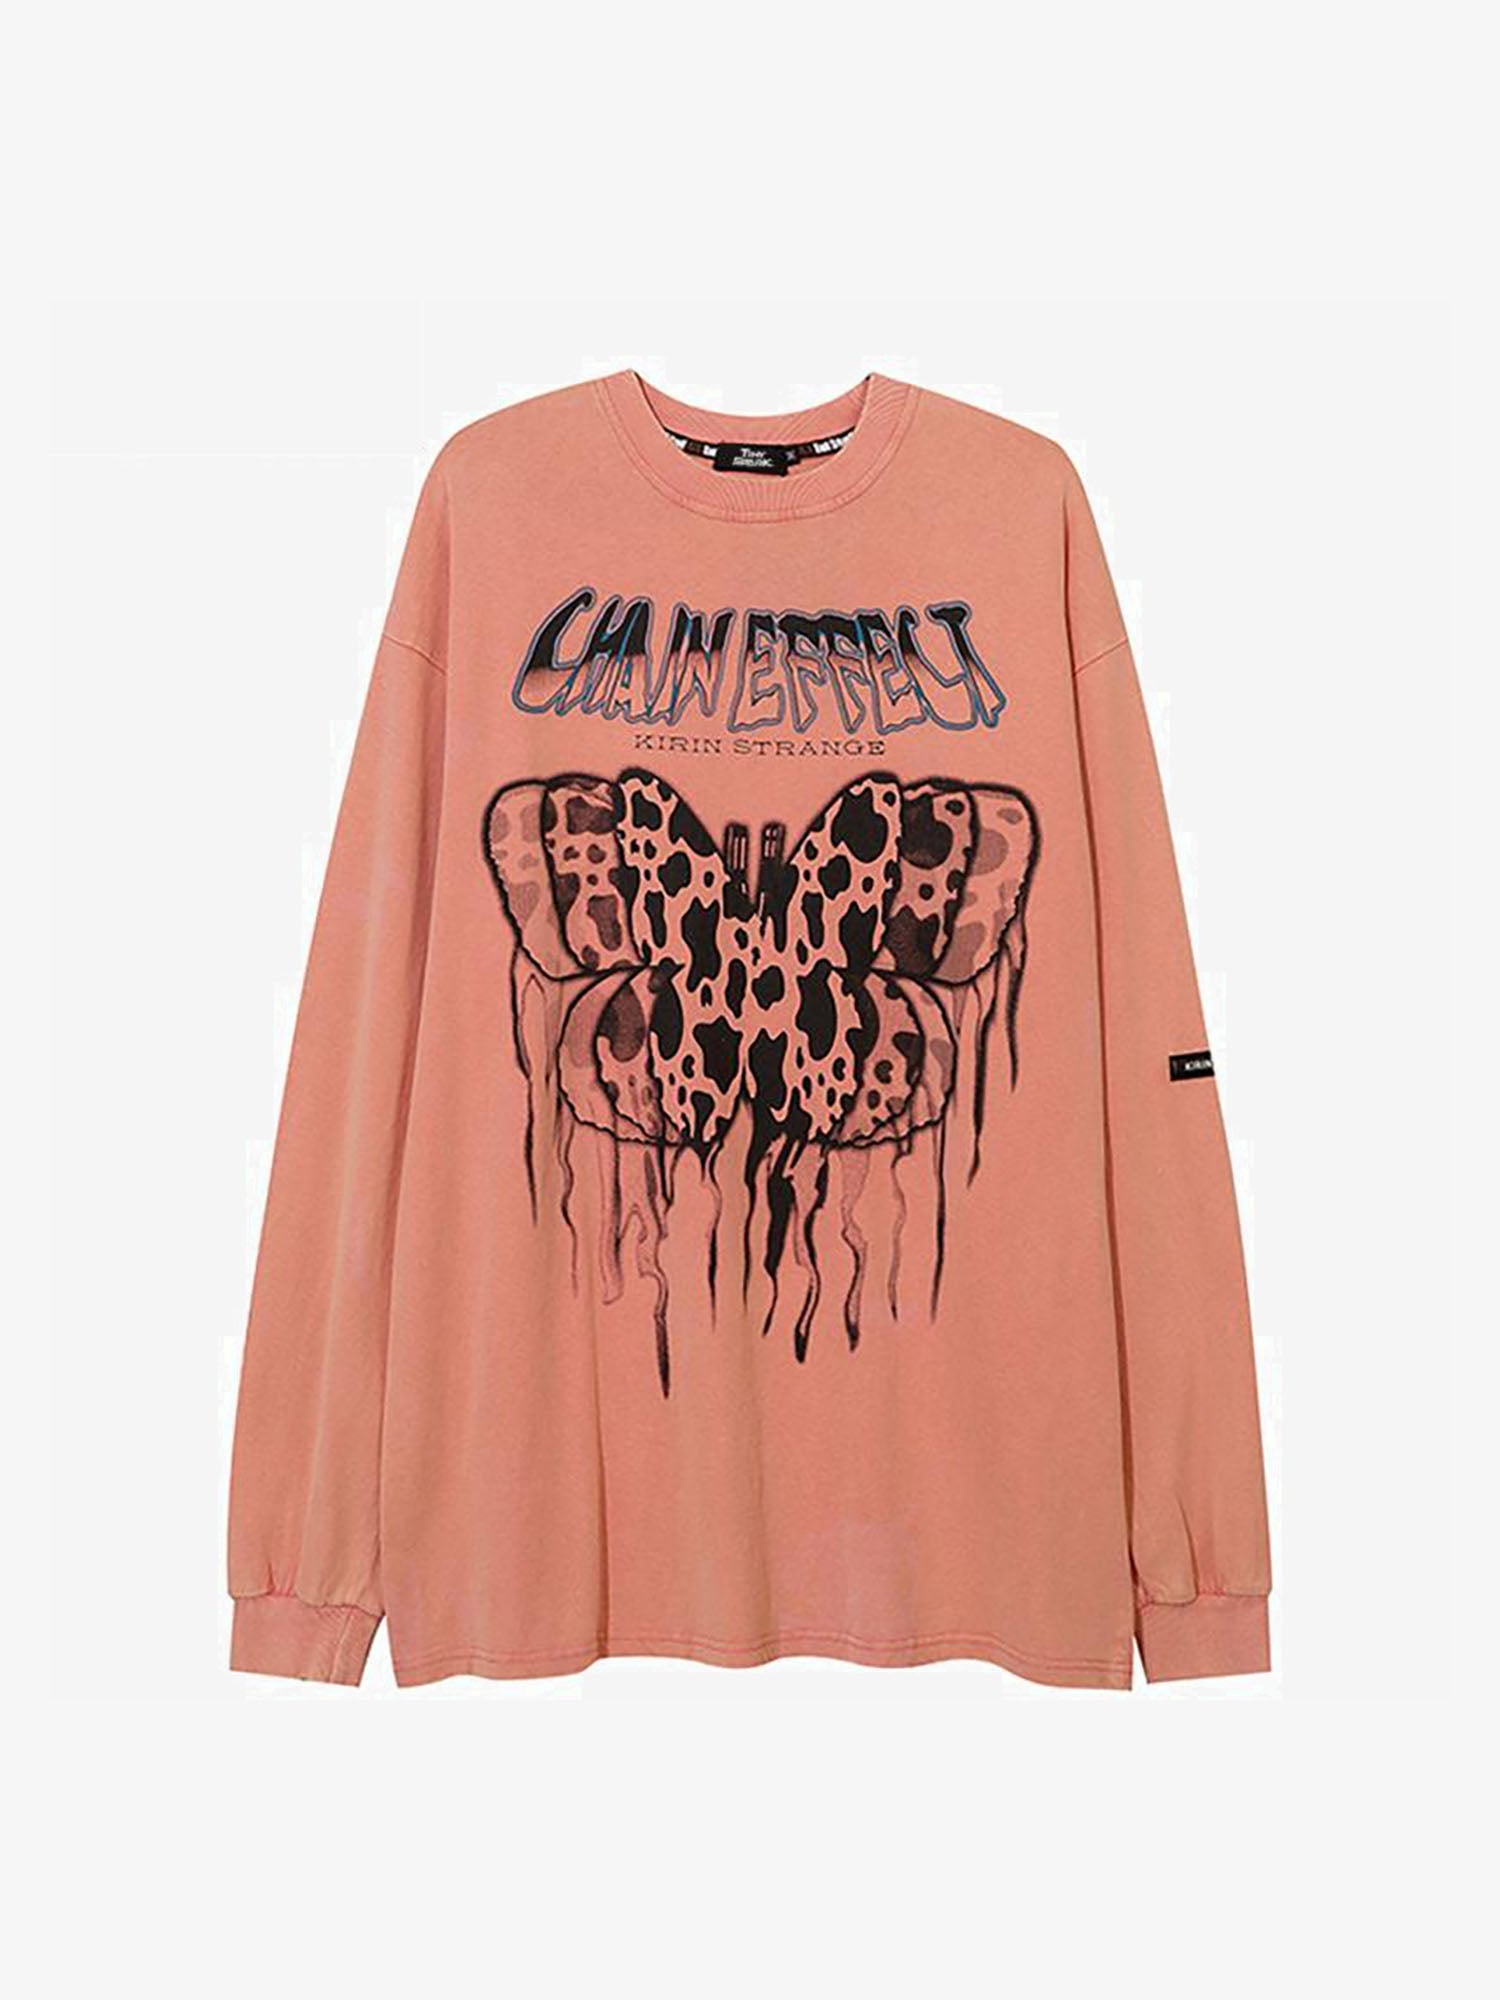 JUSTNOTAG Spotted butterfly phantom Long Sleeve Sweatshirts